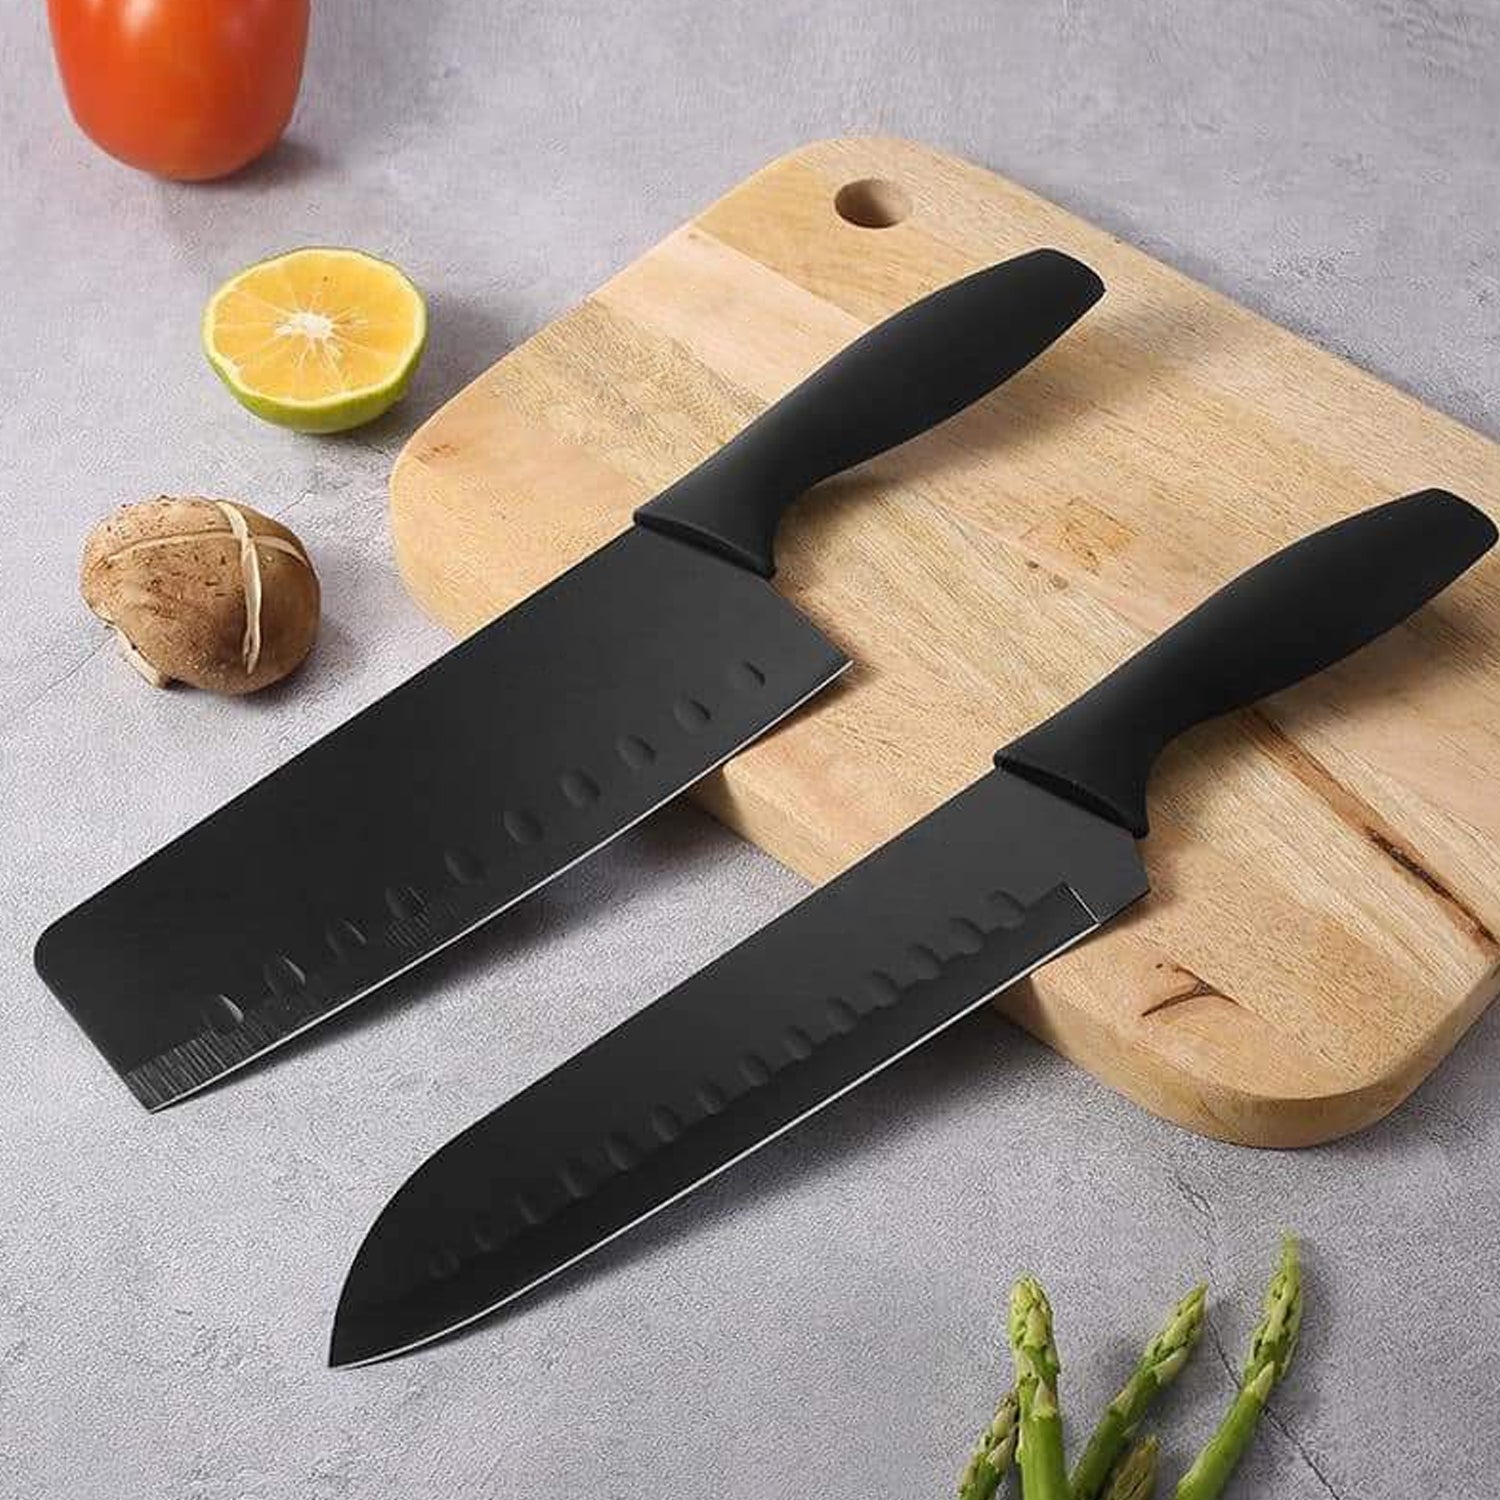 5-Piece Forged Kitchen Chef Cutlery Stainless Steel Knife Set, Chopping Knife, Chef Knife, Utility Knife, Butcher Knife (5pc)